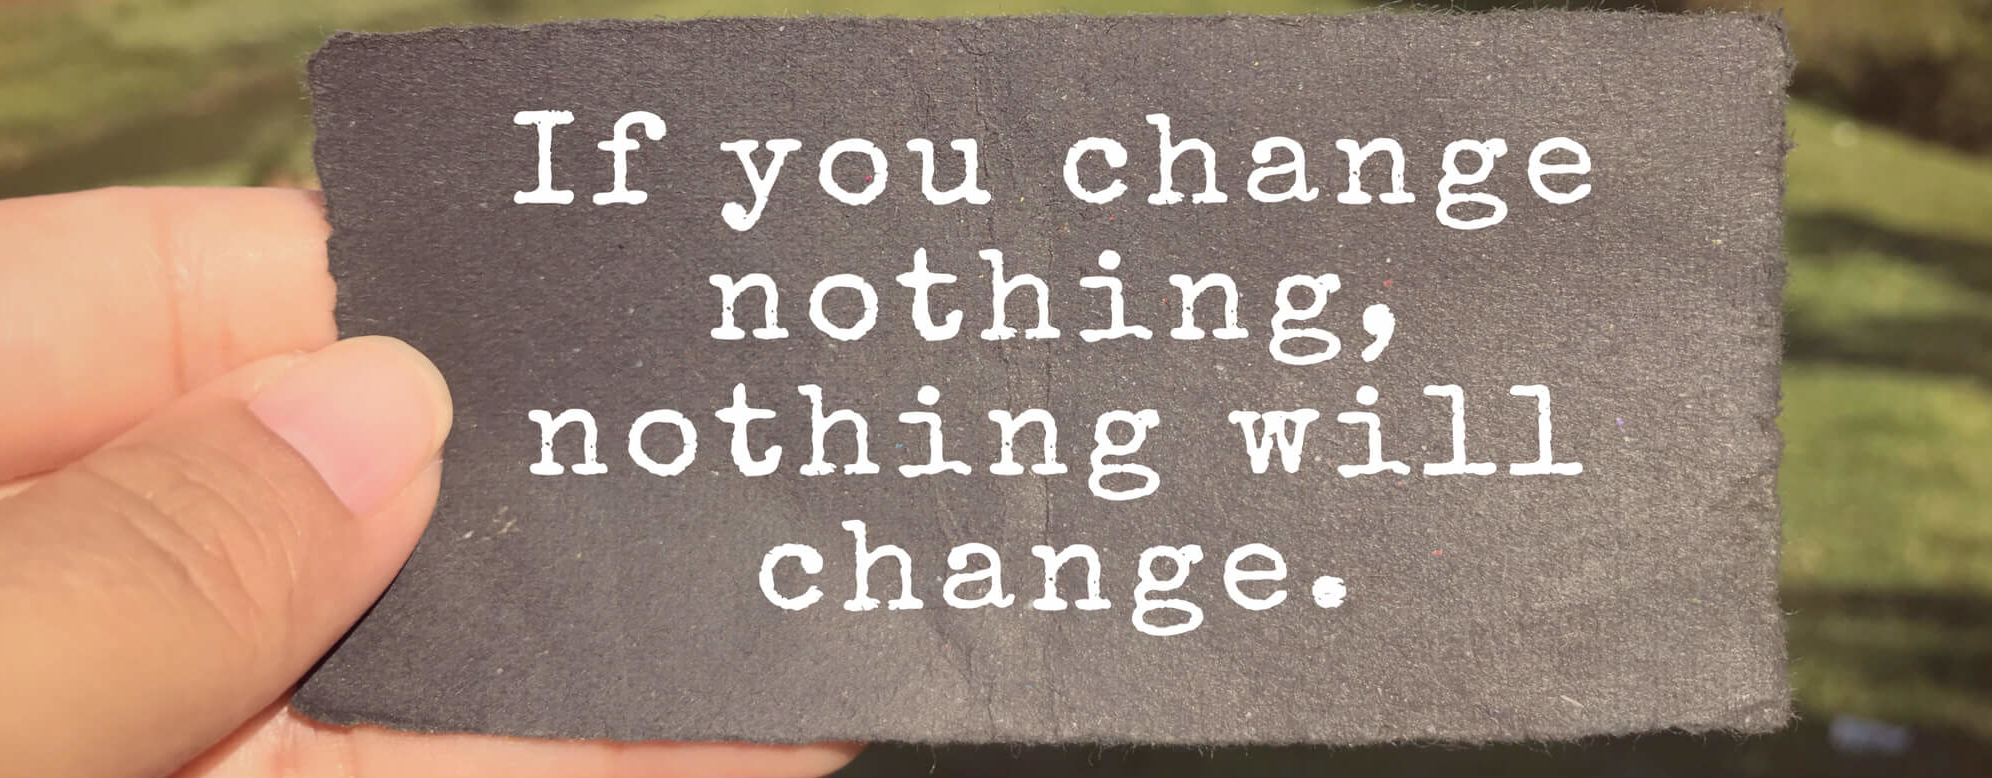 If you change nothing, nothing will change sign